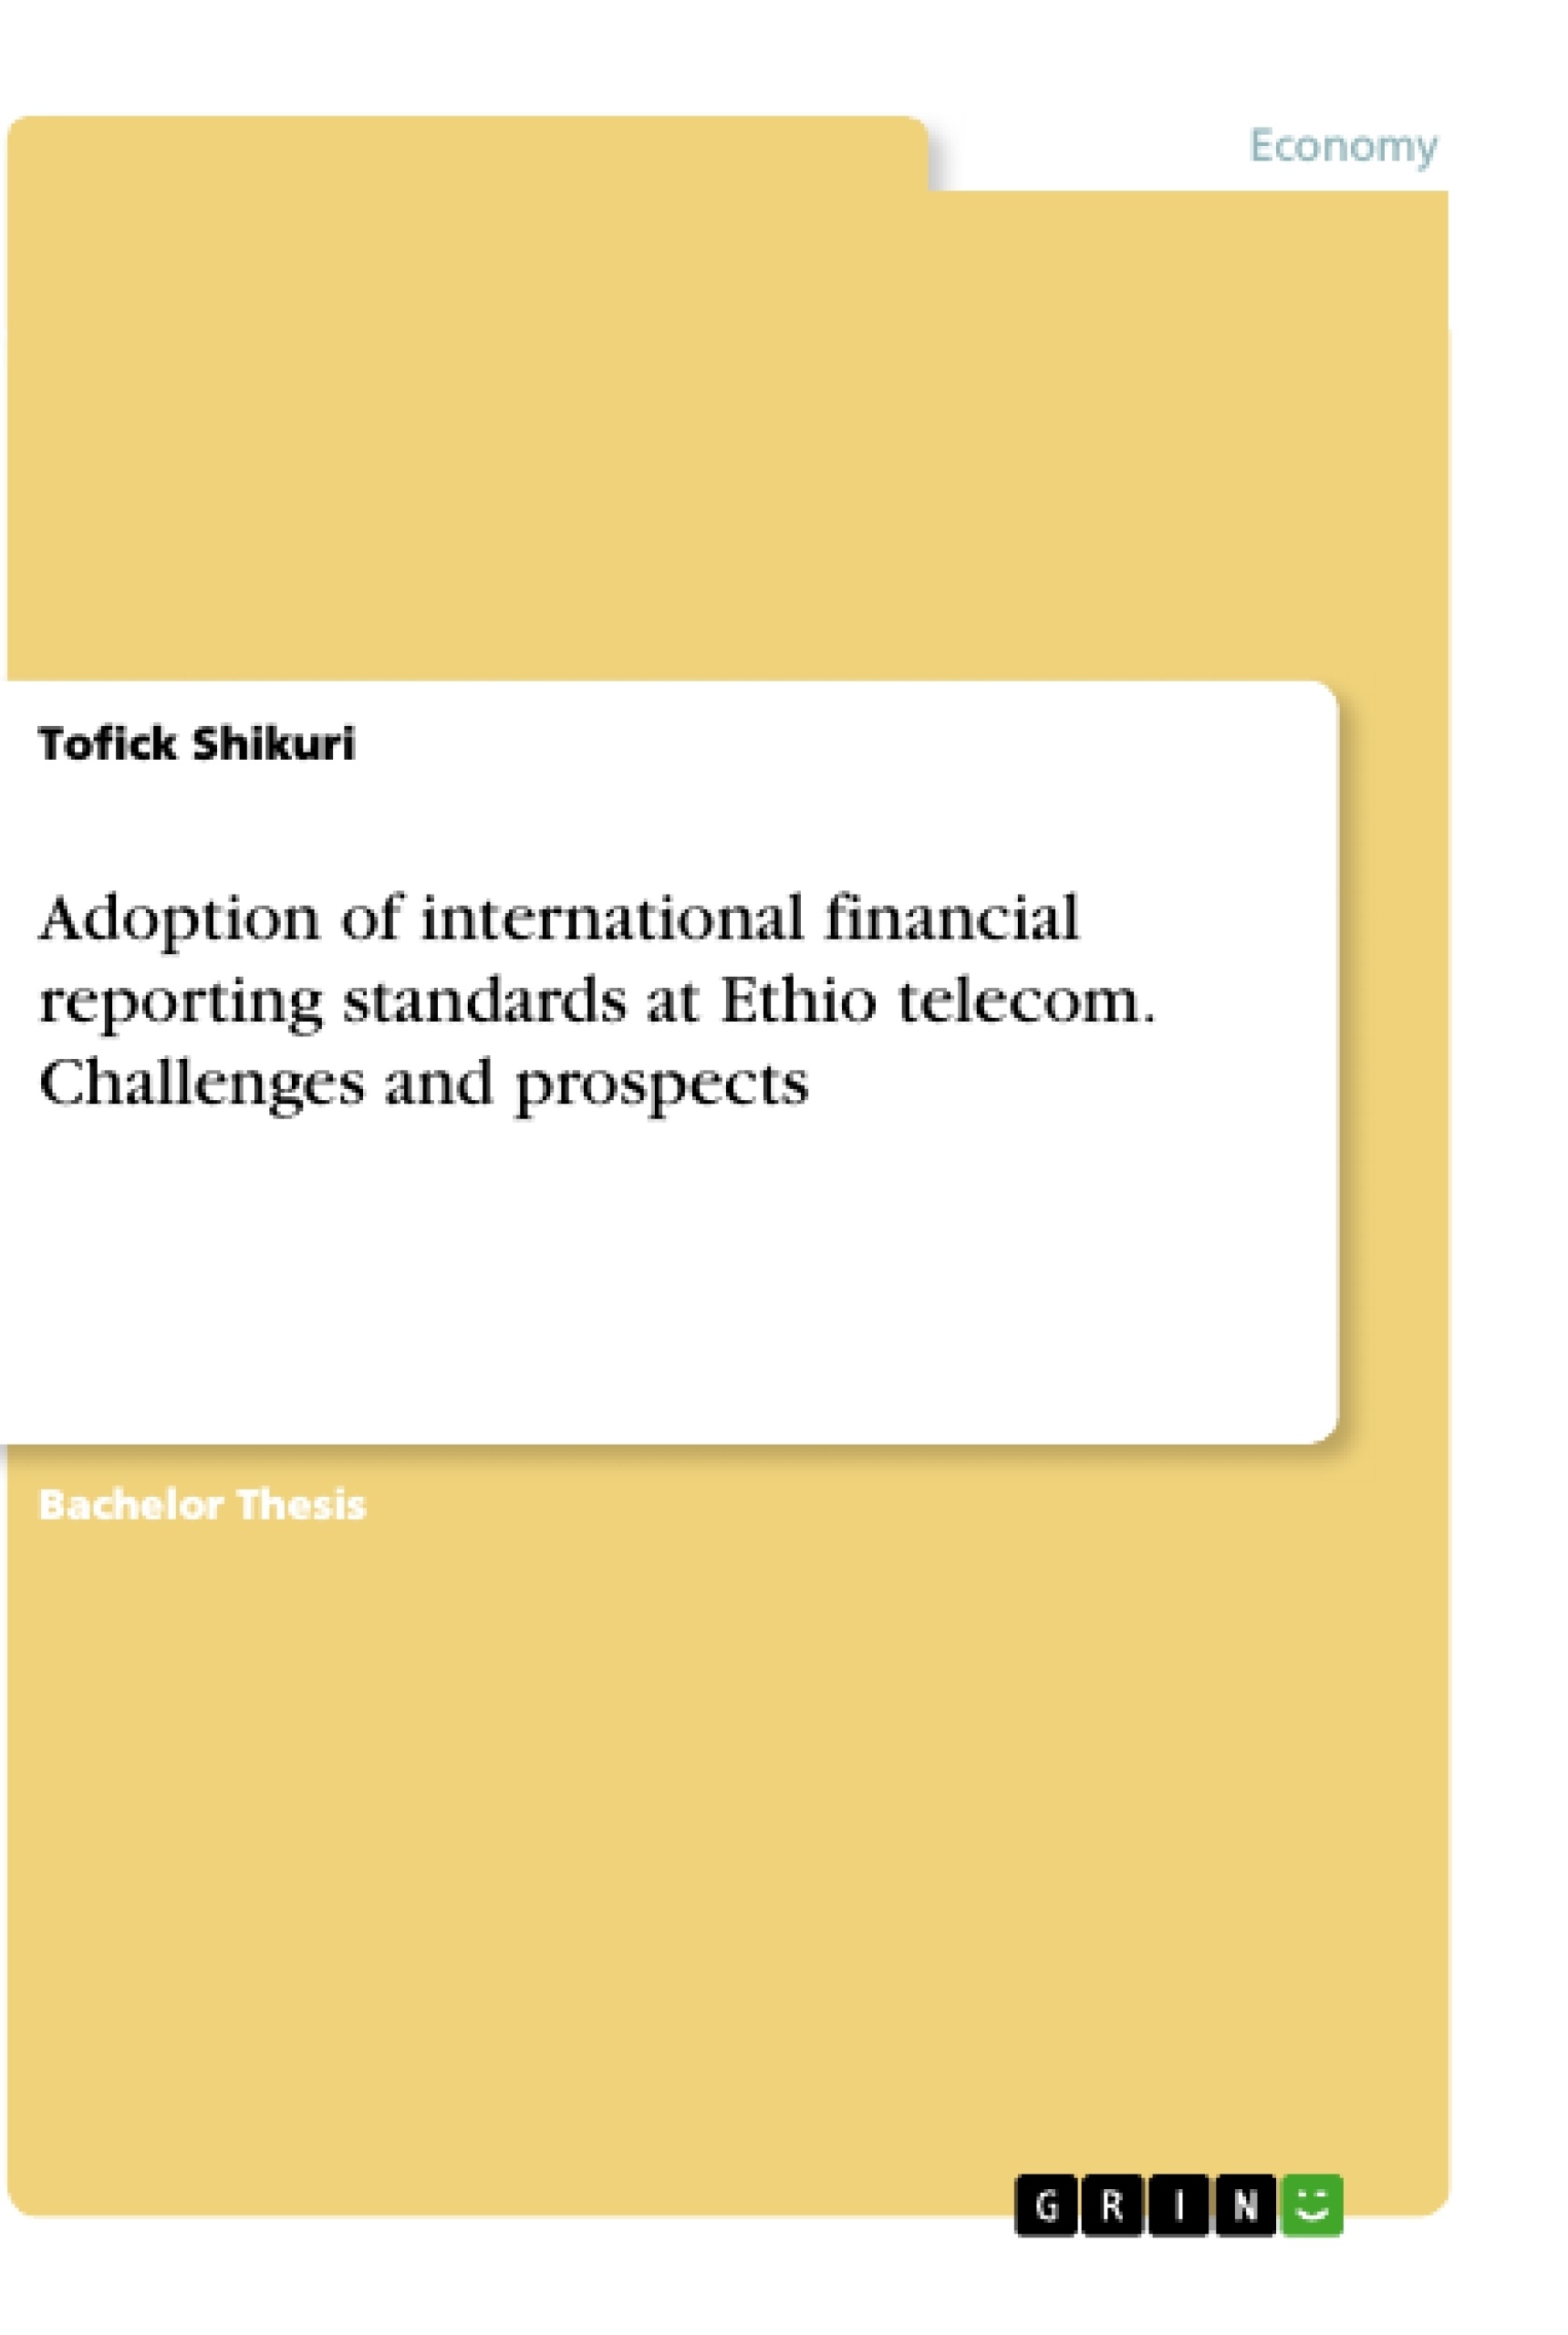 Titel: Adoption of international financial reporting standards at Ethio telecom. Challenges and prospects